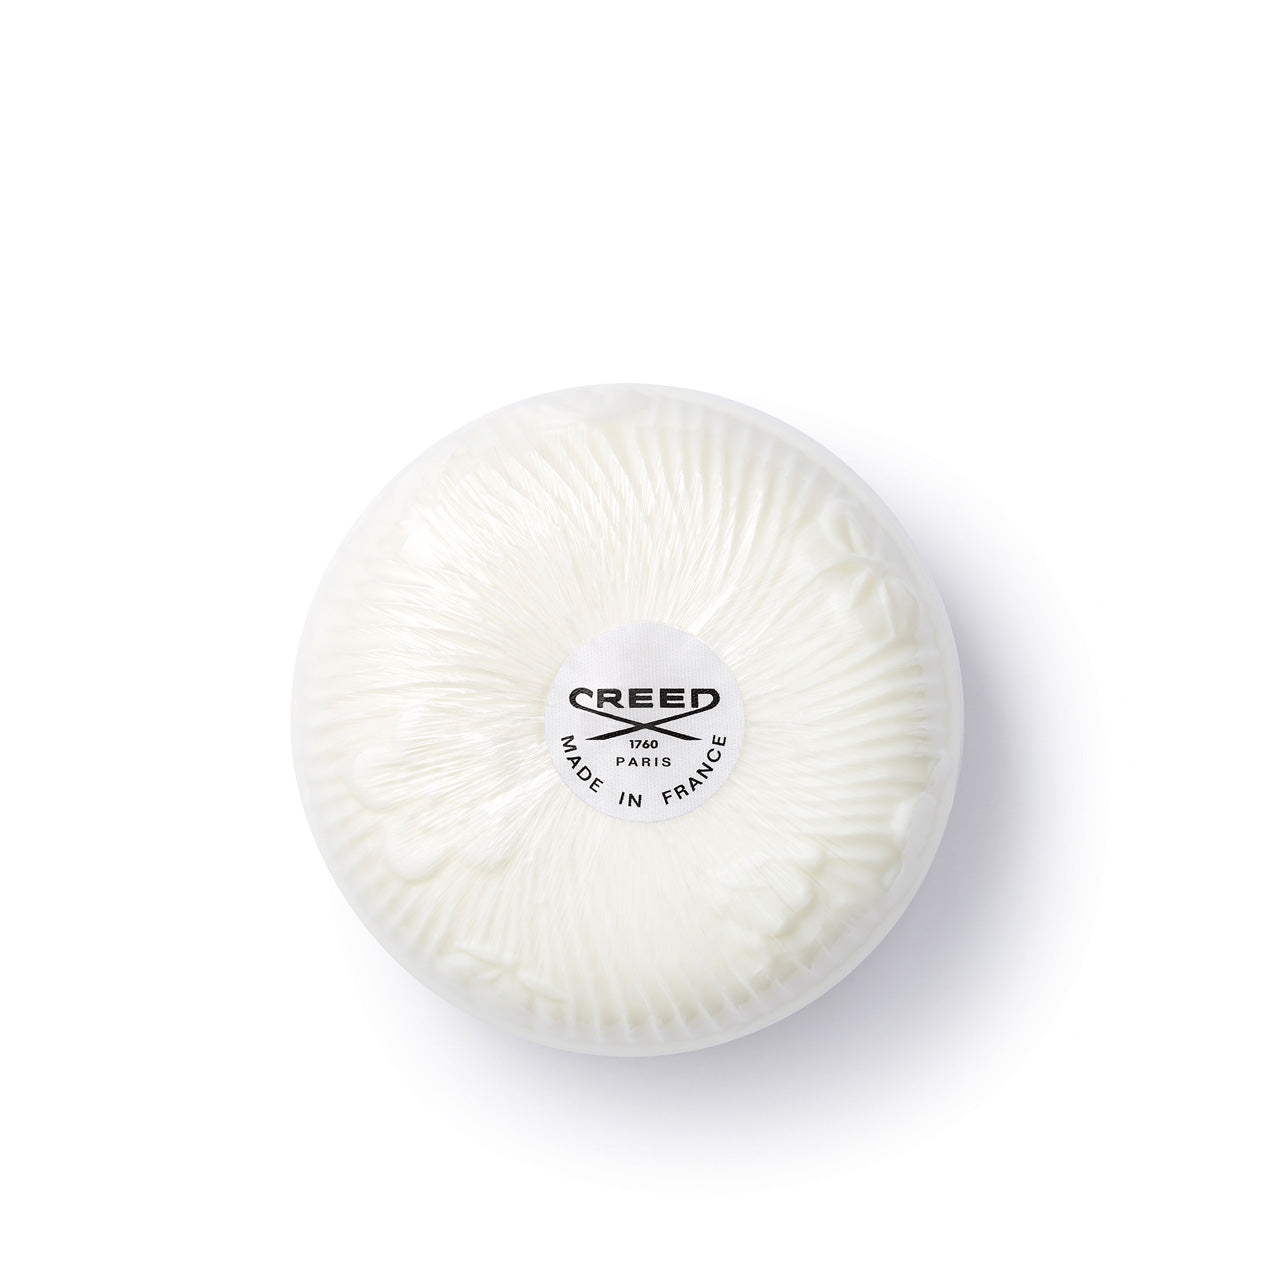 CREED AVENTUS FOR HER SAPONE SINGOLO 150 GR AVENTUS FOR HER SAPONE SINGOLO 150 GR 2000001775189 €40,00